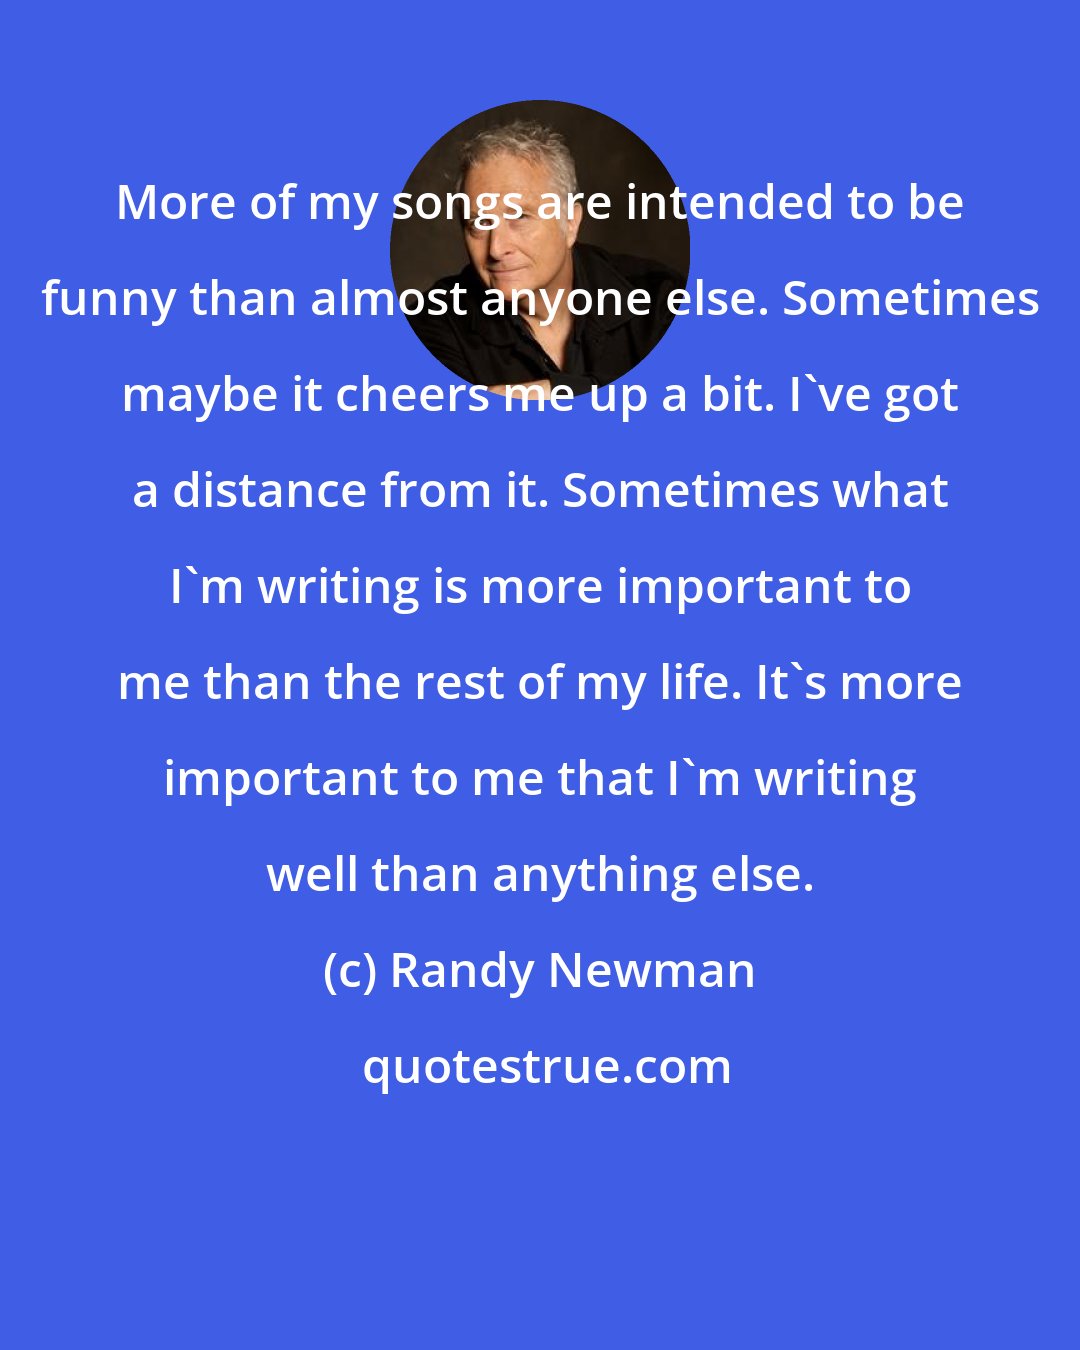 Randy Newman: More of my songs are intended to be funny than almost anyone else. Sometimes maybe it cheers me up a bit. I've got a distance from it. Sometimes what I'm writing is more important to me than the rest of my life. It's more important to me that I'm writing well than anything else.